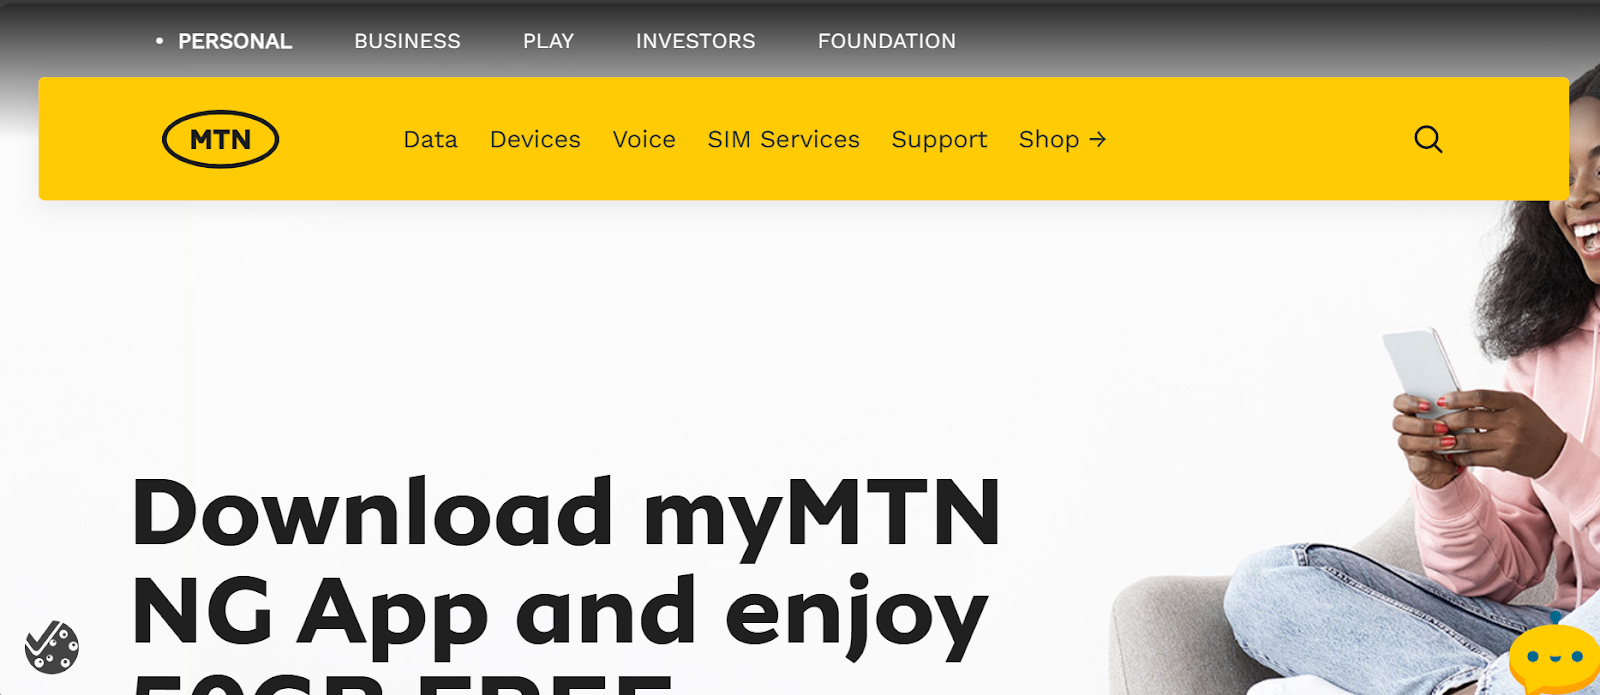 MTN Nigeria website snapshot highlighting the services it offers.